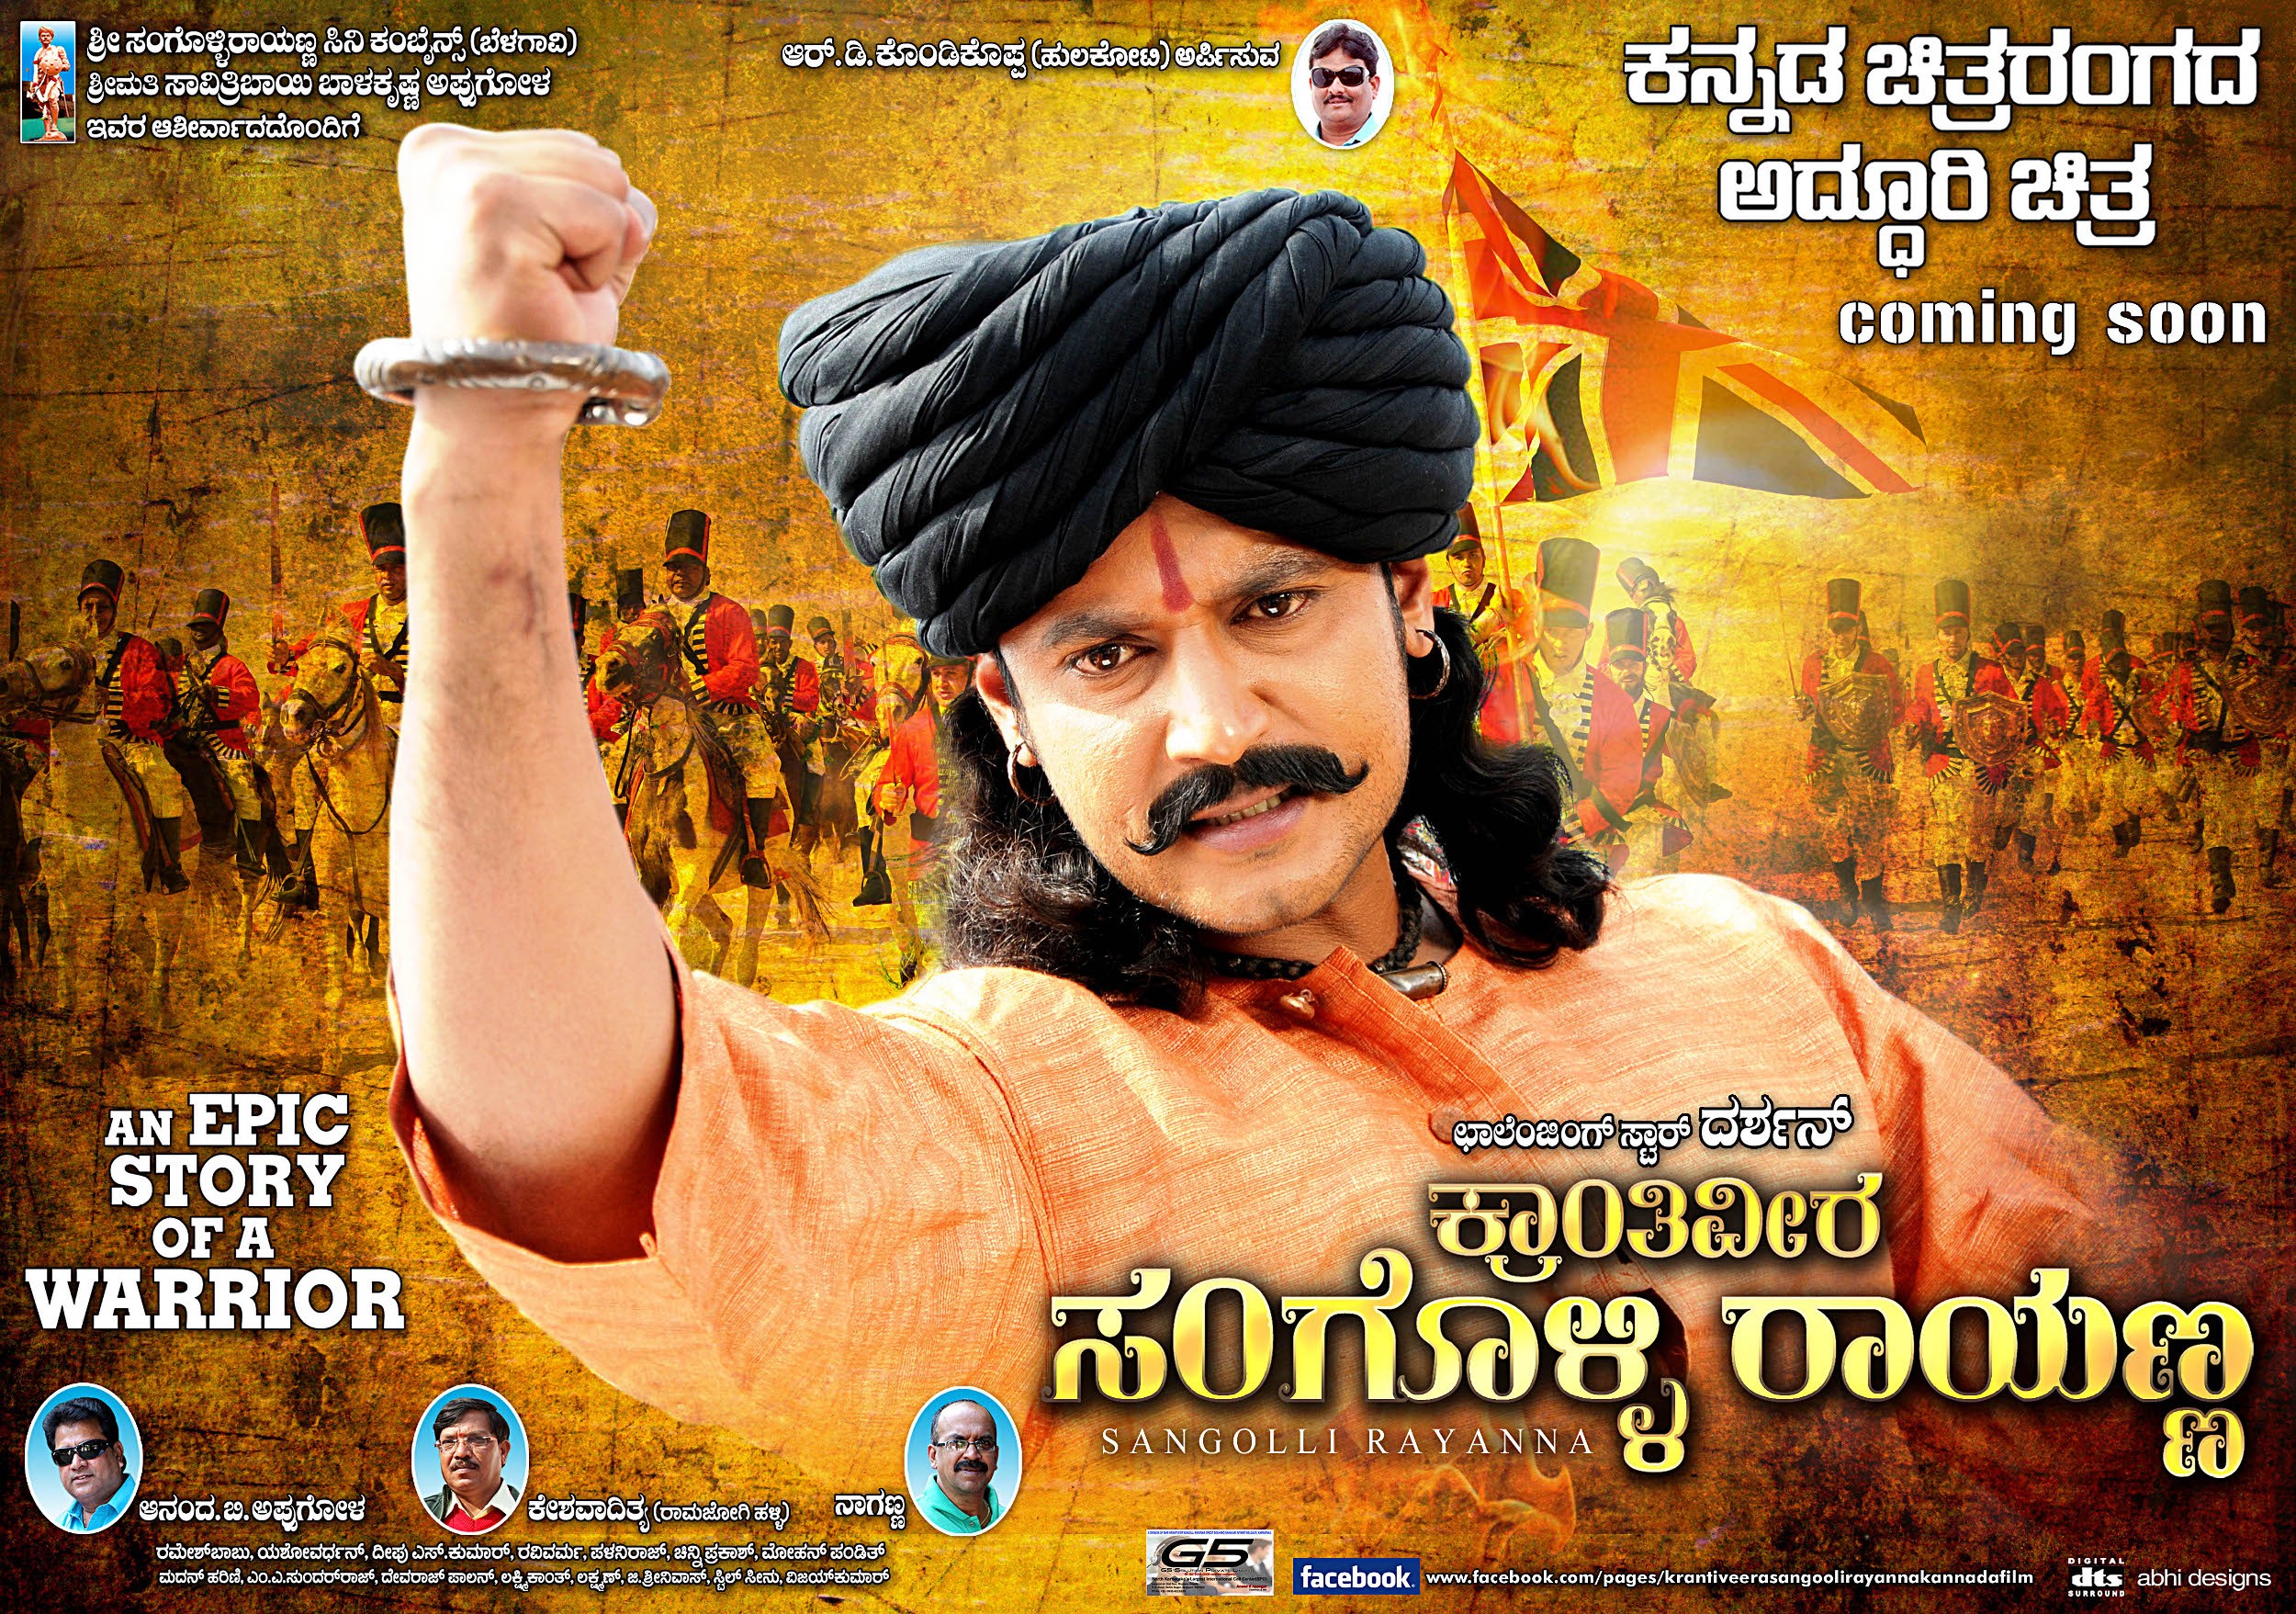 Mega Sized Movie Poster Image for Sangolli Rayanna (#33 of 79)